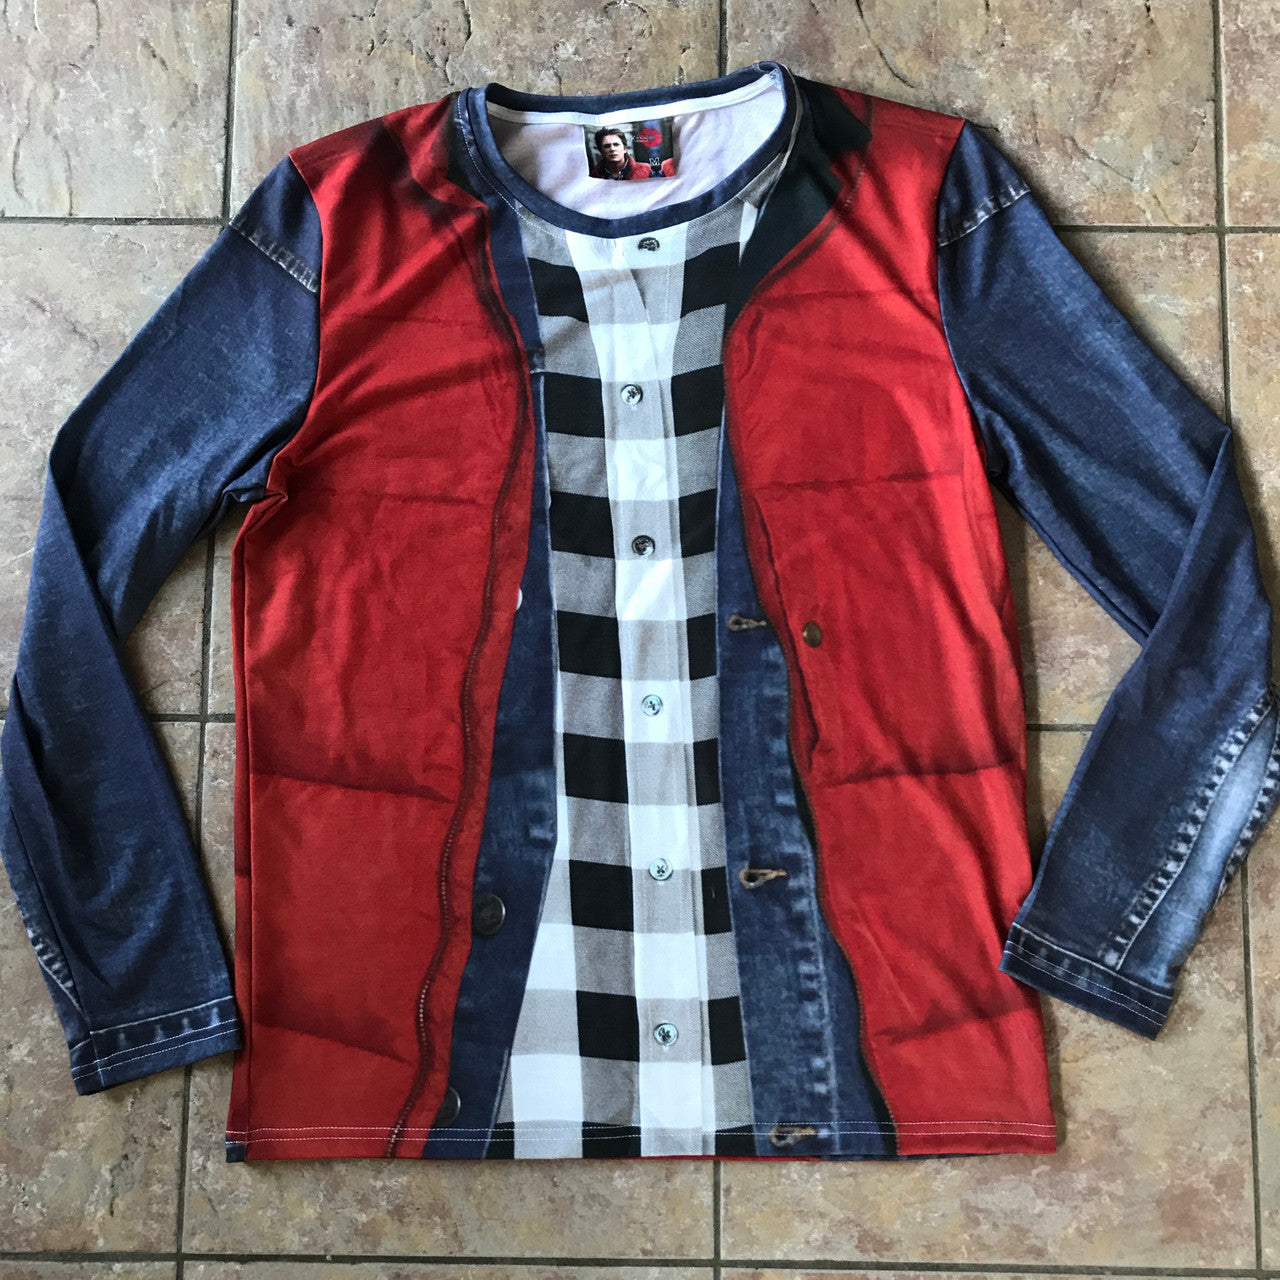 Marty KiSS Cut & Sew Top - McFly Delorean - Back to the Future - Michael J Fox - Costume